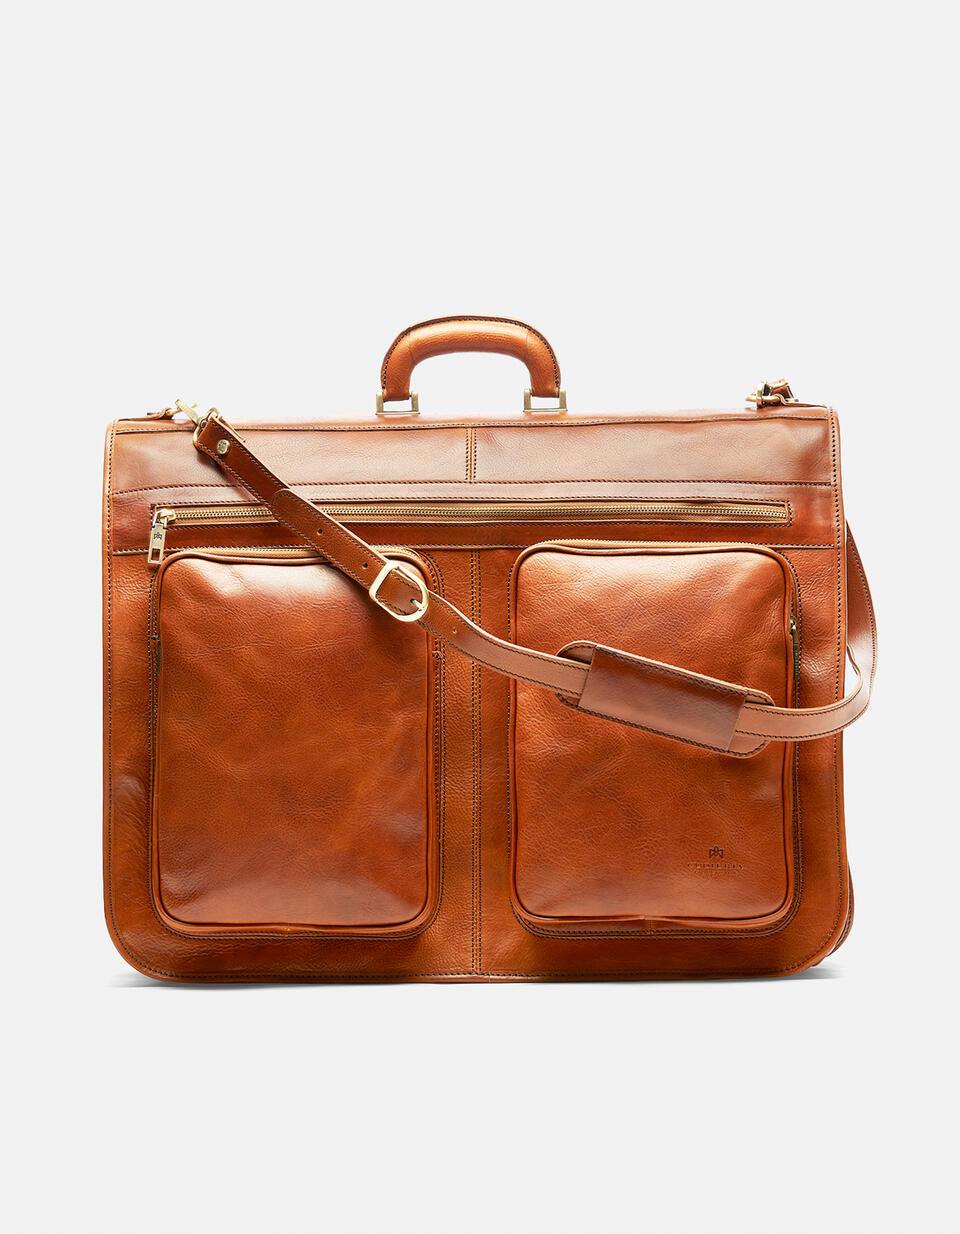 Oxford travel garment bag in vegetable tanned leather - Luggage | TRAVEL BAGS COGNAC - Luggage | TRAVEL BAGSCuoieria Fiorentina